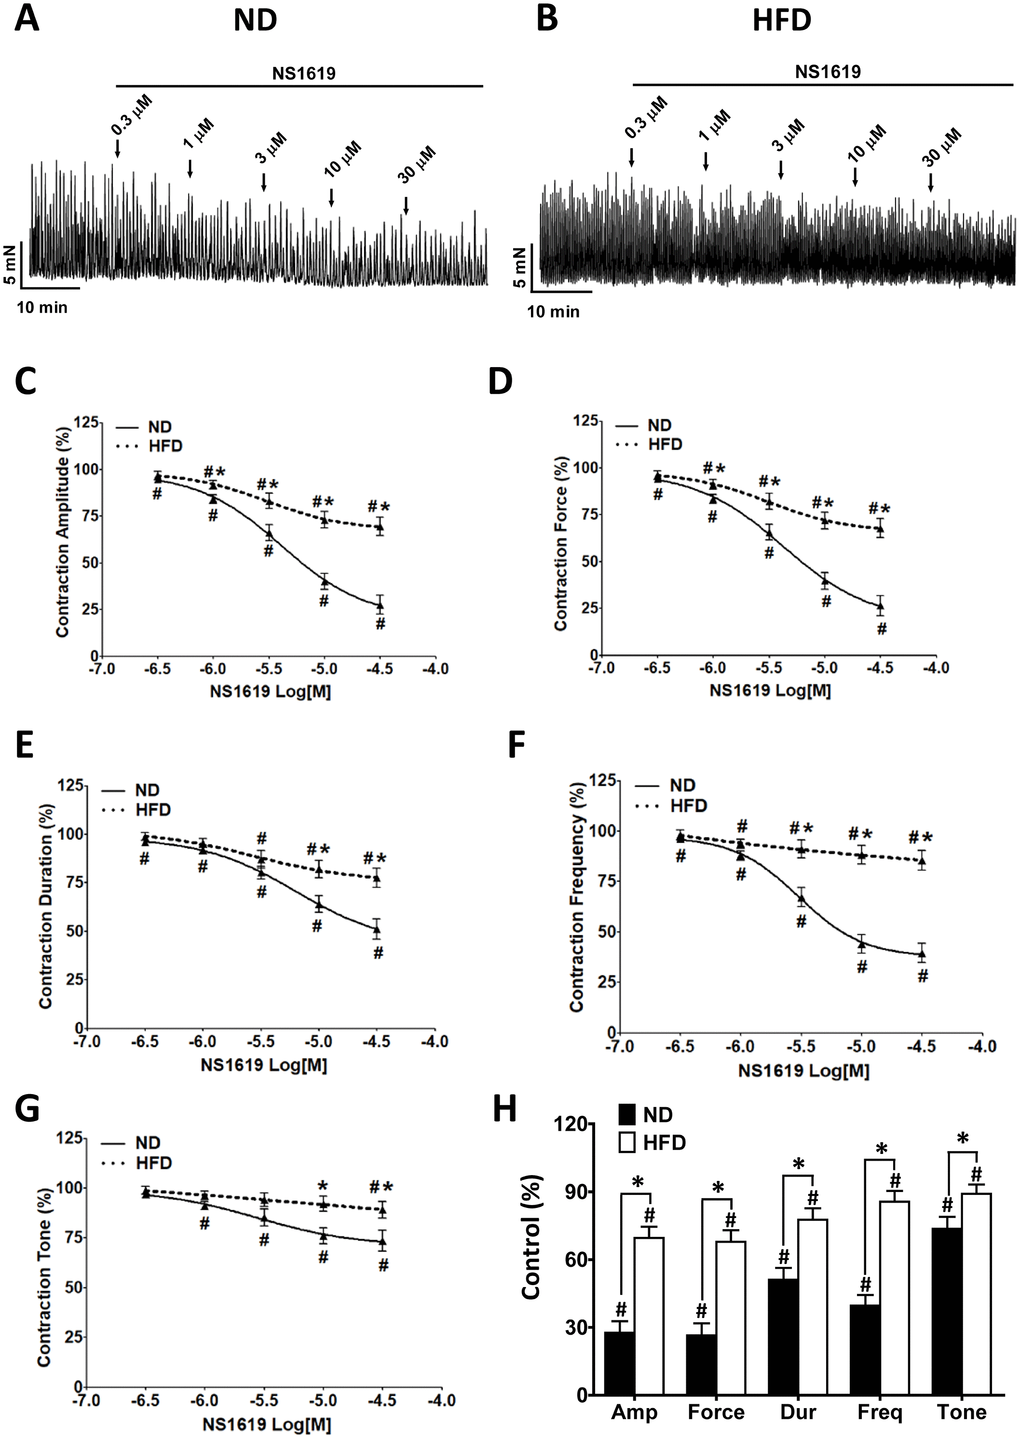 The inhibitory effects of NS1619 on spontaneous phasic contractions are attenuated in DSM strips from HFD rats. Representative recordings of DSM strips isolated from ND (A) and HFD (B) rats, illustrating the concentration-dependent inhibitory effects of NS1619 (0.3-30 μM) on spontaneous phasic contractions. Cumulative concentration-response curves illustrate the effects of NS1619 on the amplitude (C), muscle integral force (D), duration (E), frequency (F) and tone (G) of spontaneous phasic contractions in ND and HFD DSM strips. (H) Summary data illustrating that the inhibitory effects of 30 μM NS1619 on spontaneous phasic contractions in isolated DSM strips were lower in HFD rats than in ND rats. Data are expressed as the mean ± SEM; n = 11, N = 8 in the ND group, n = 11, N = 7 in the HFD group; * P NS: not significant; Amp: amplitude; Dur: duration; Freq: frequency.